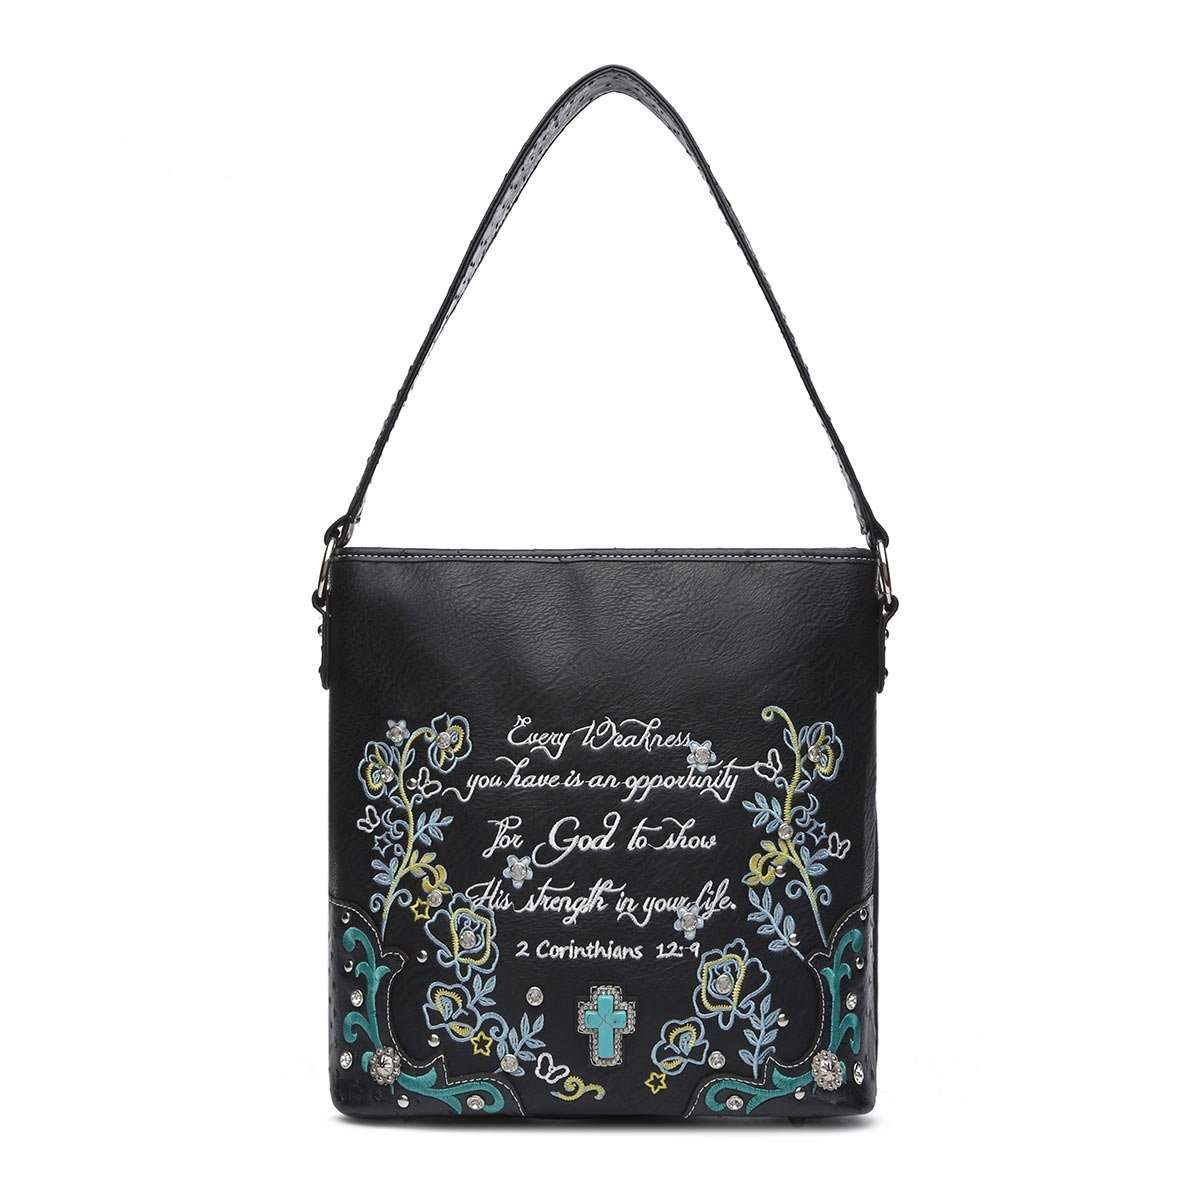 Designs by MyUtopia Shout Out:Cowgirl Trendy Embroidered Bible Verse 2 Corinthians 12:9 Country Western Totebag Purse,Black,Handbag Purse